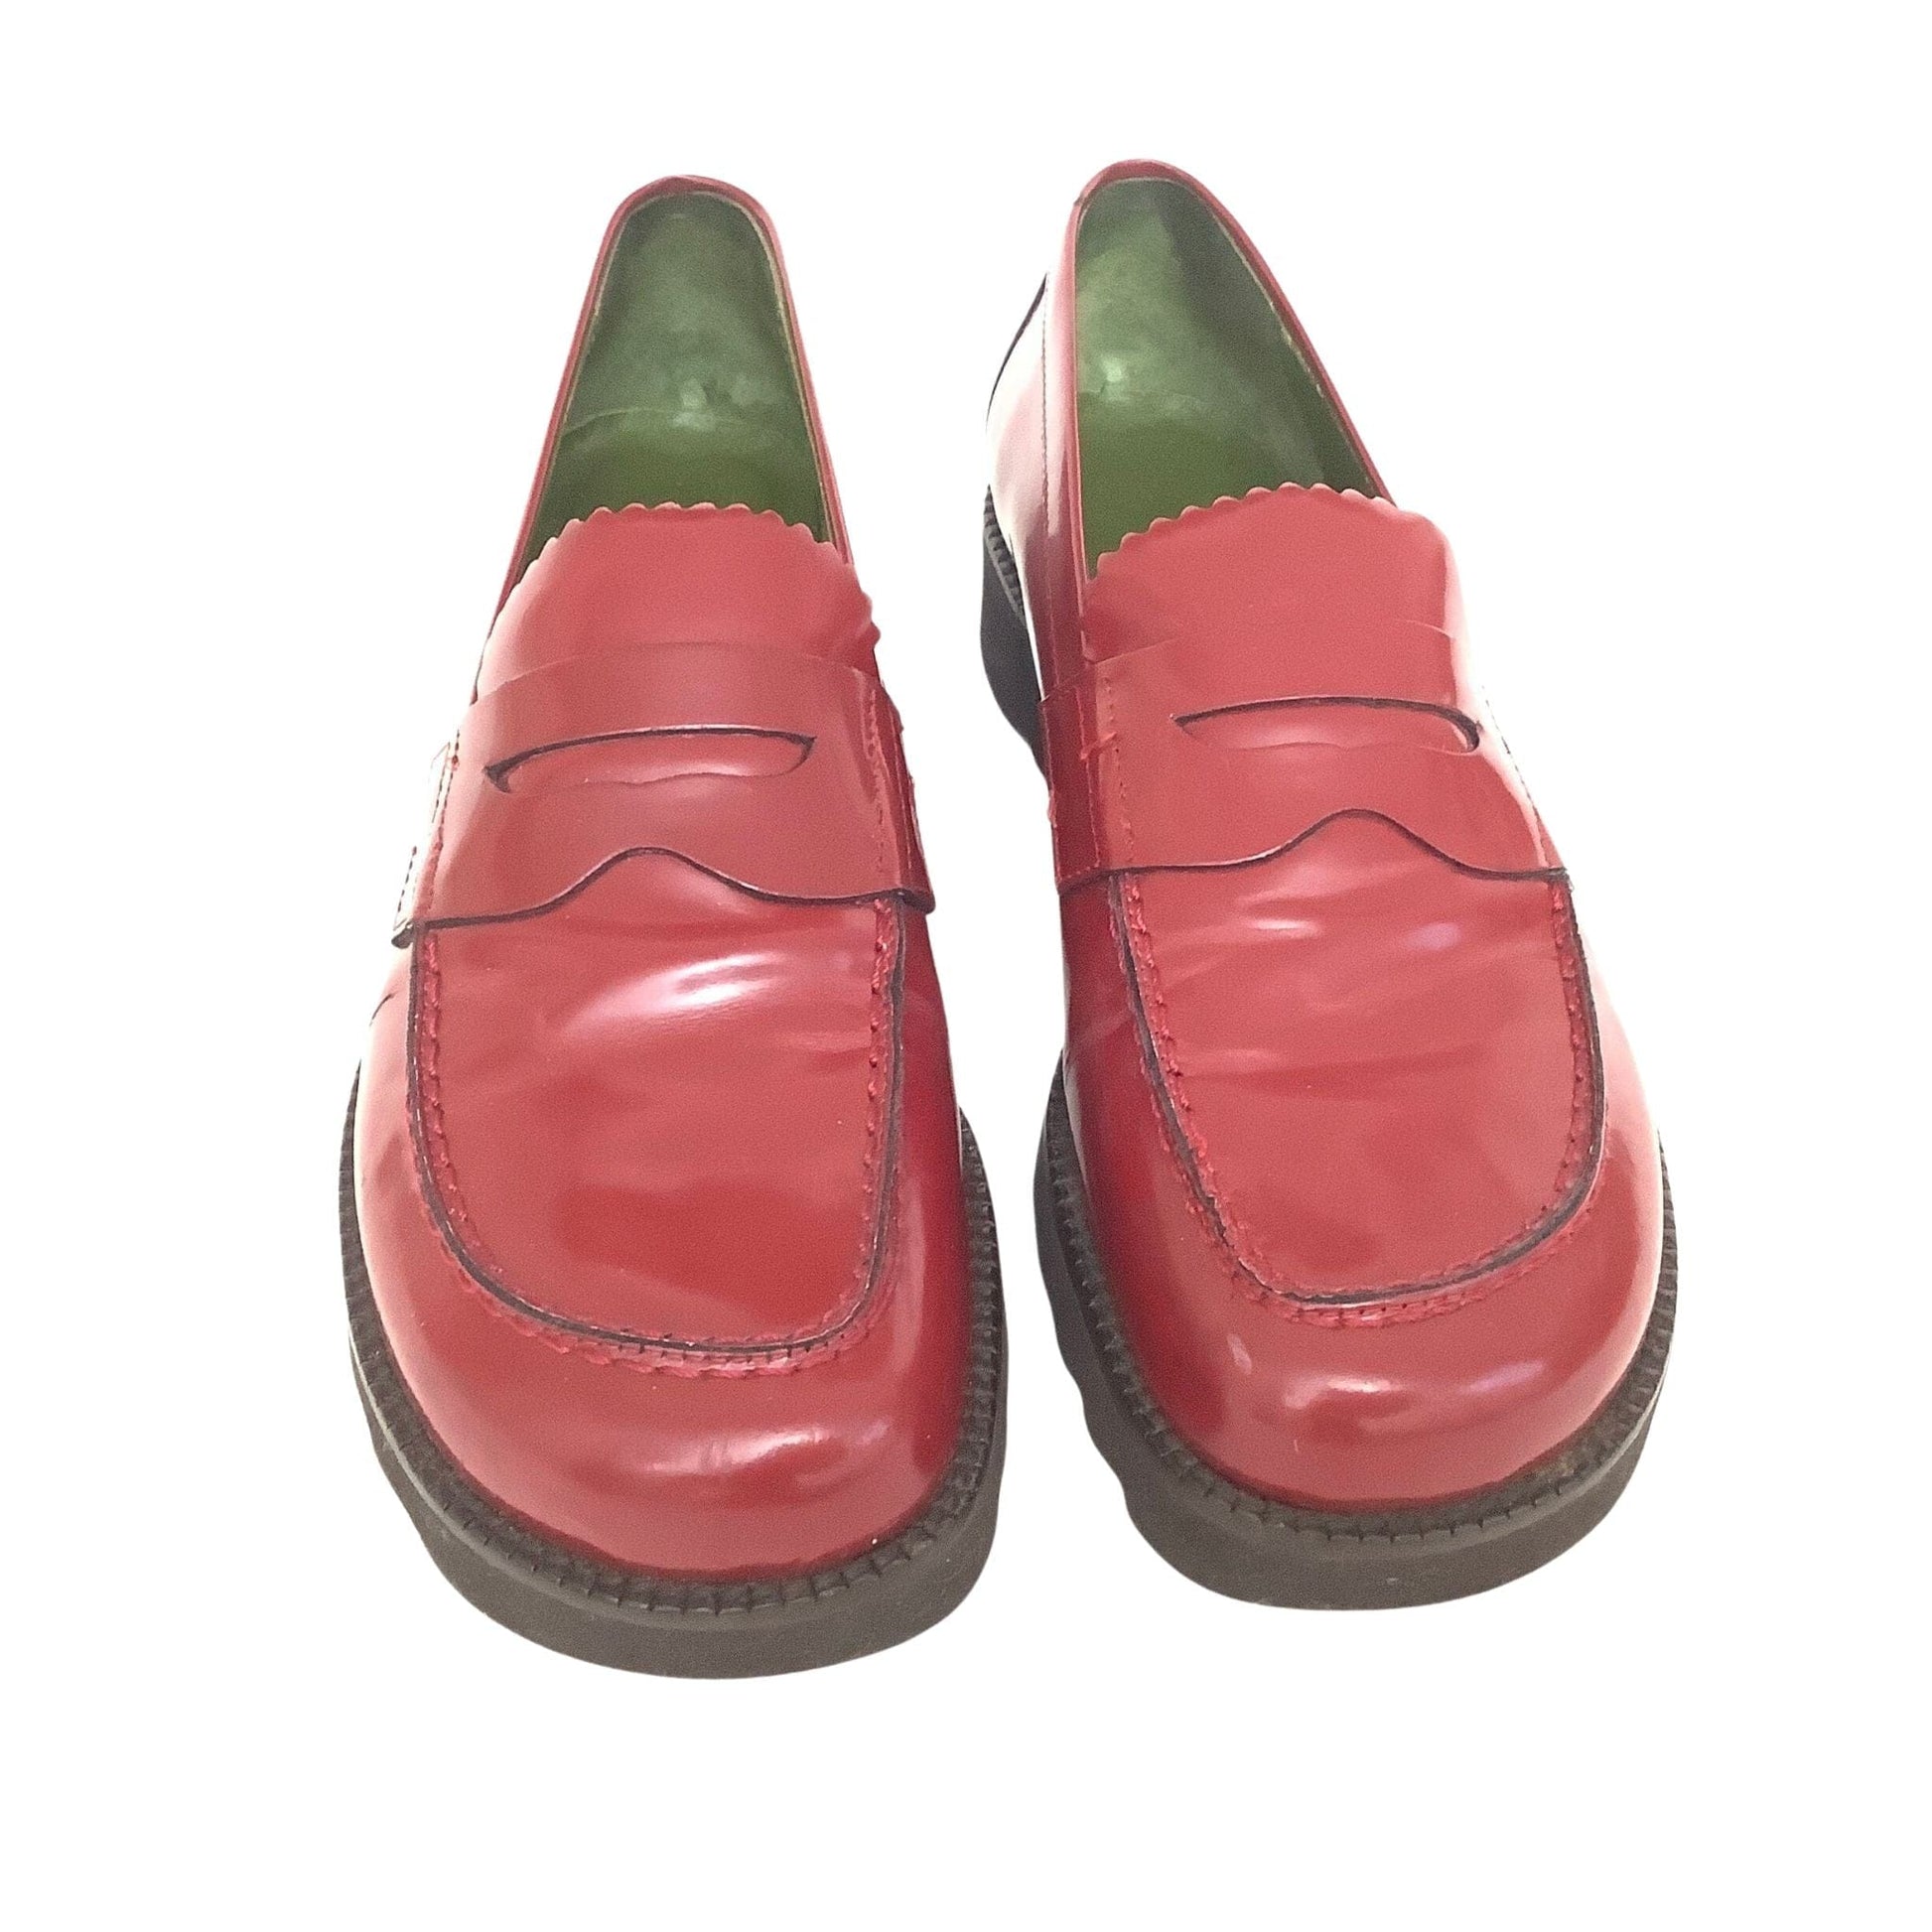 Lug Sole Red Loafers 7 / Red / Vintage 1990s